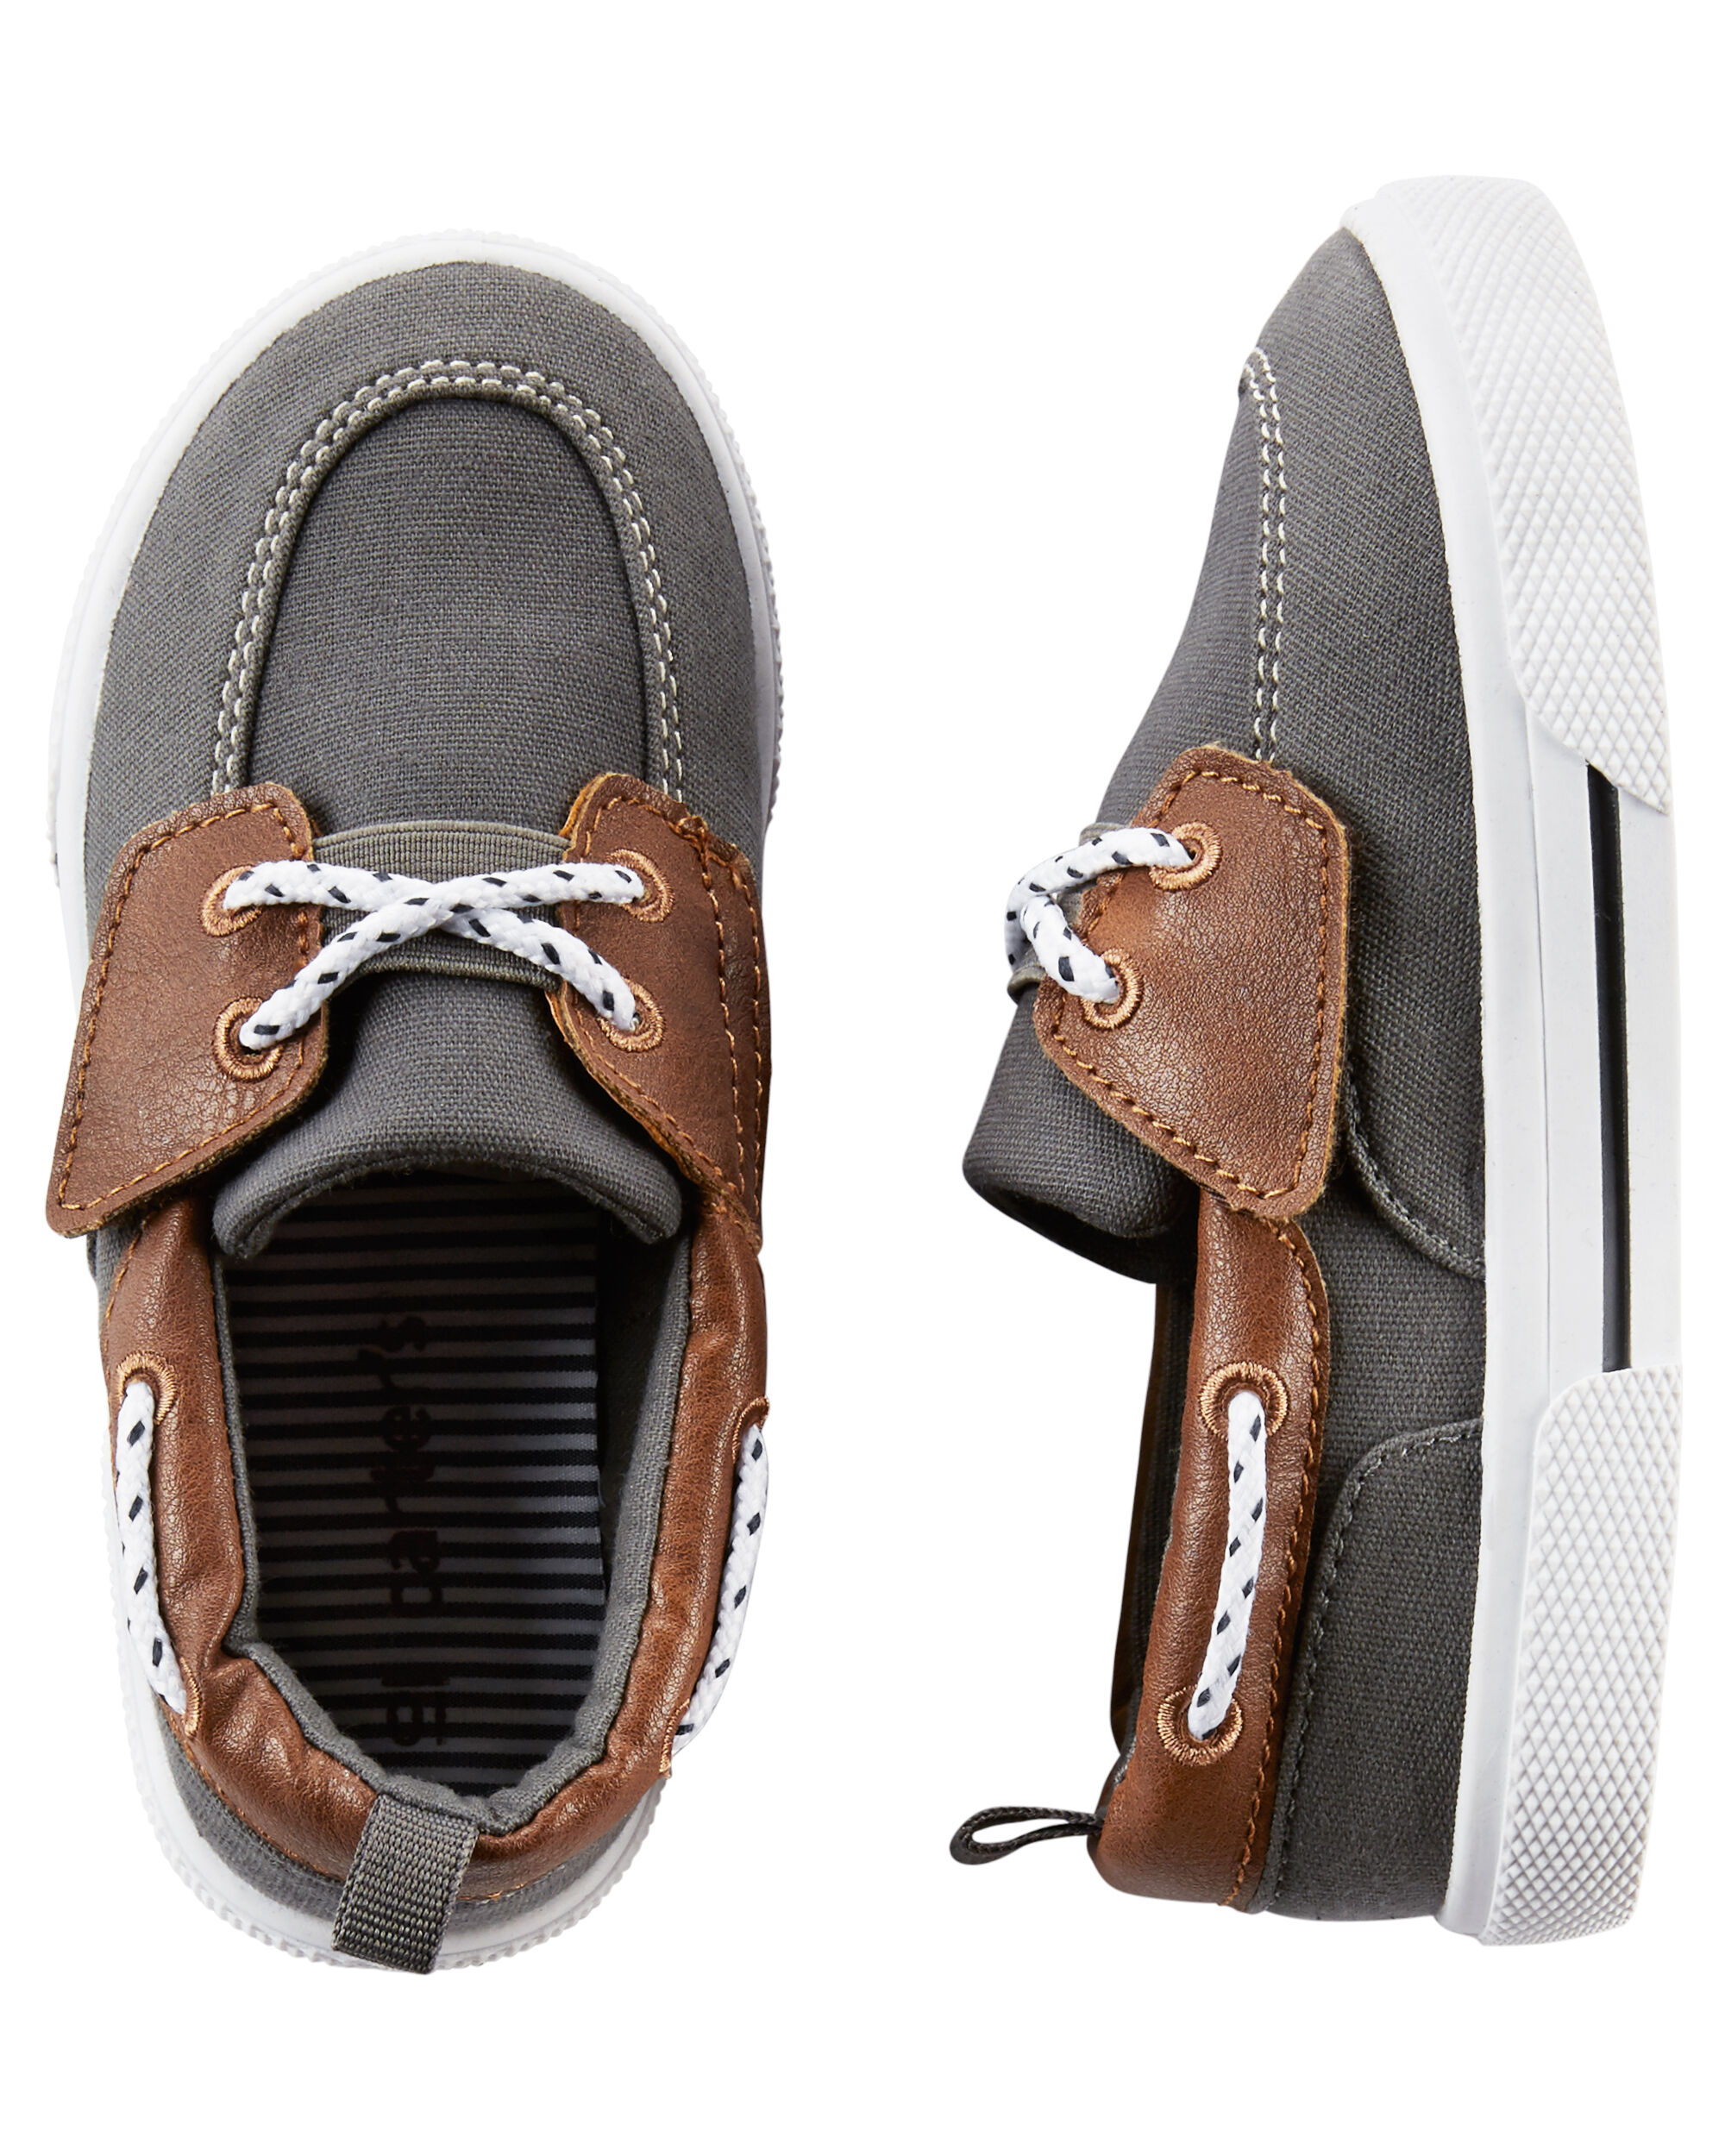 carter's boat shoes